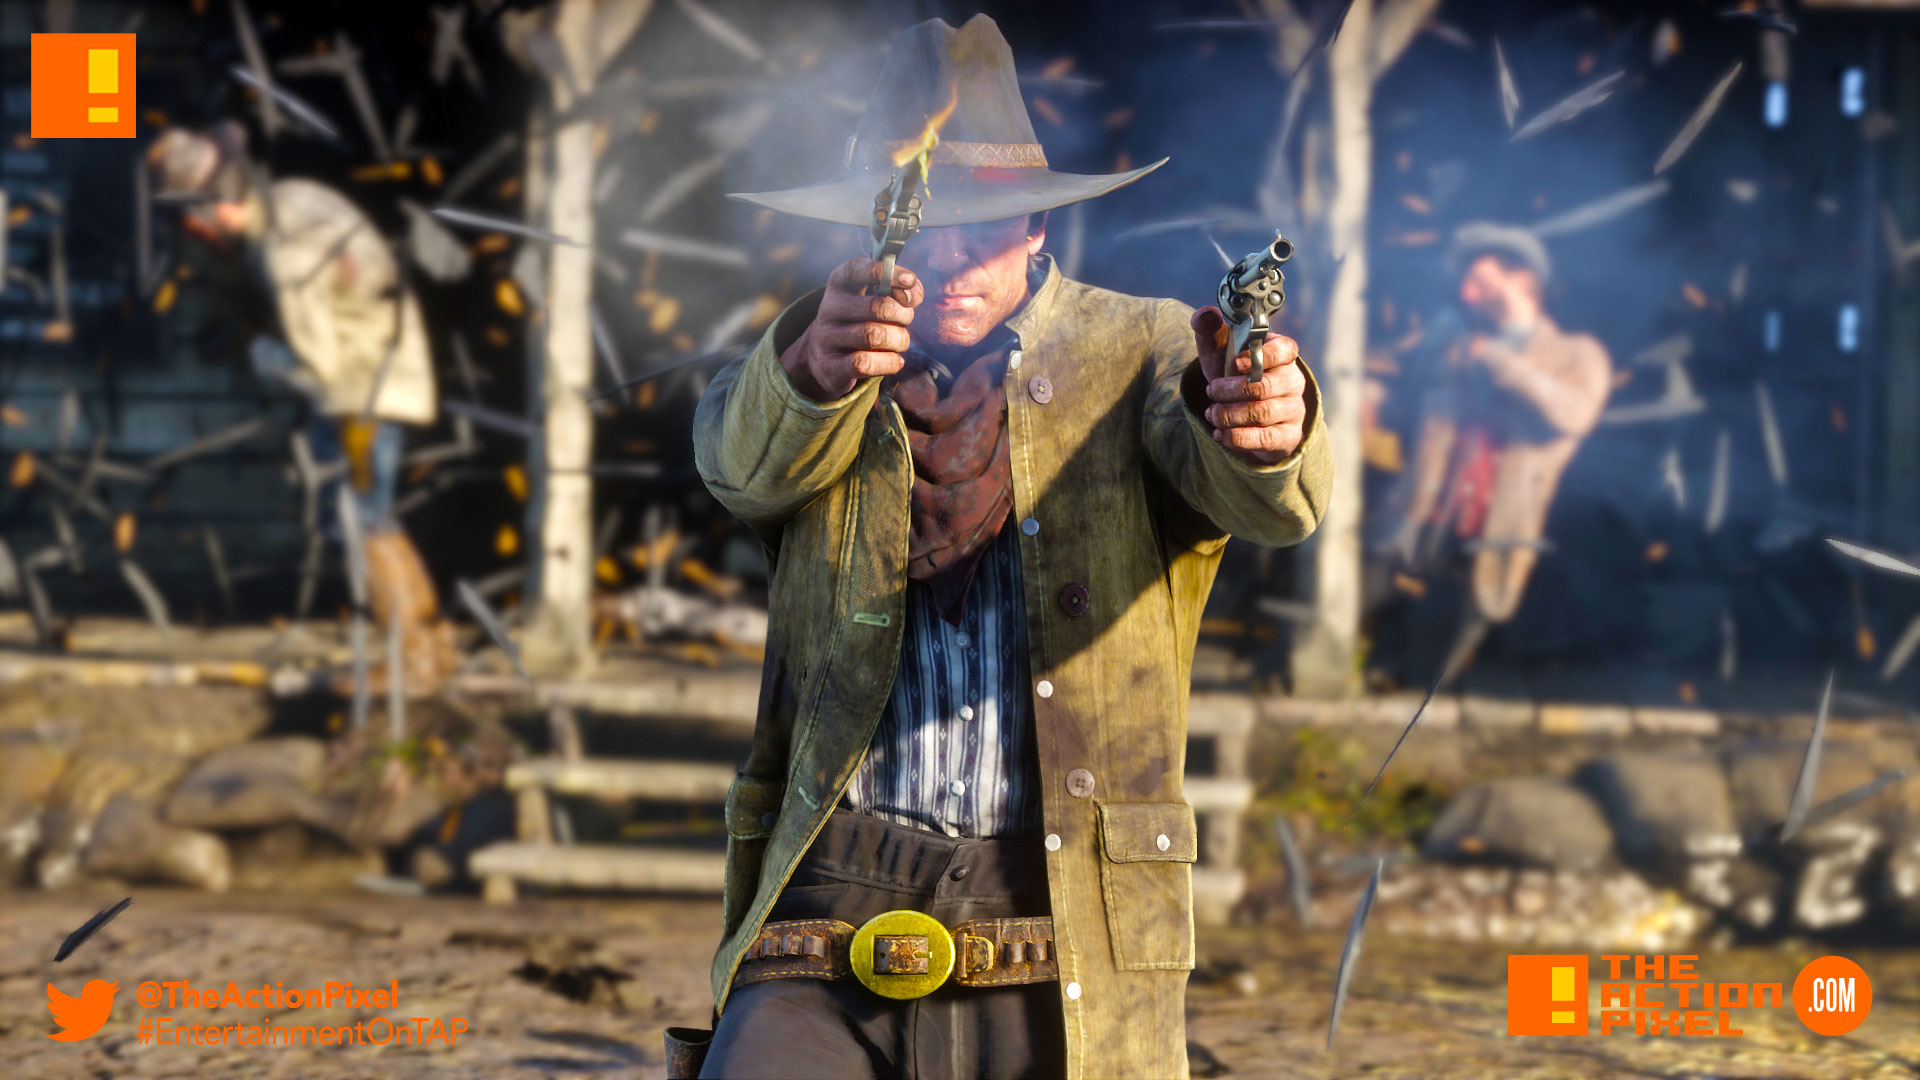 rockstar games, red dead redemption, entertainment on tap, the action pixel, rockstar games, delayed, screenshots, trailer, trailer 2, delayed, screenshot, screenshots, red dead redemption 2 delayed,